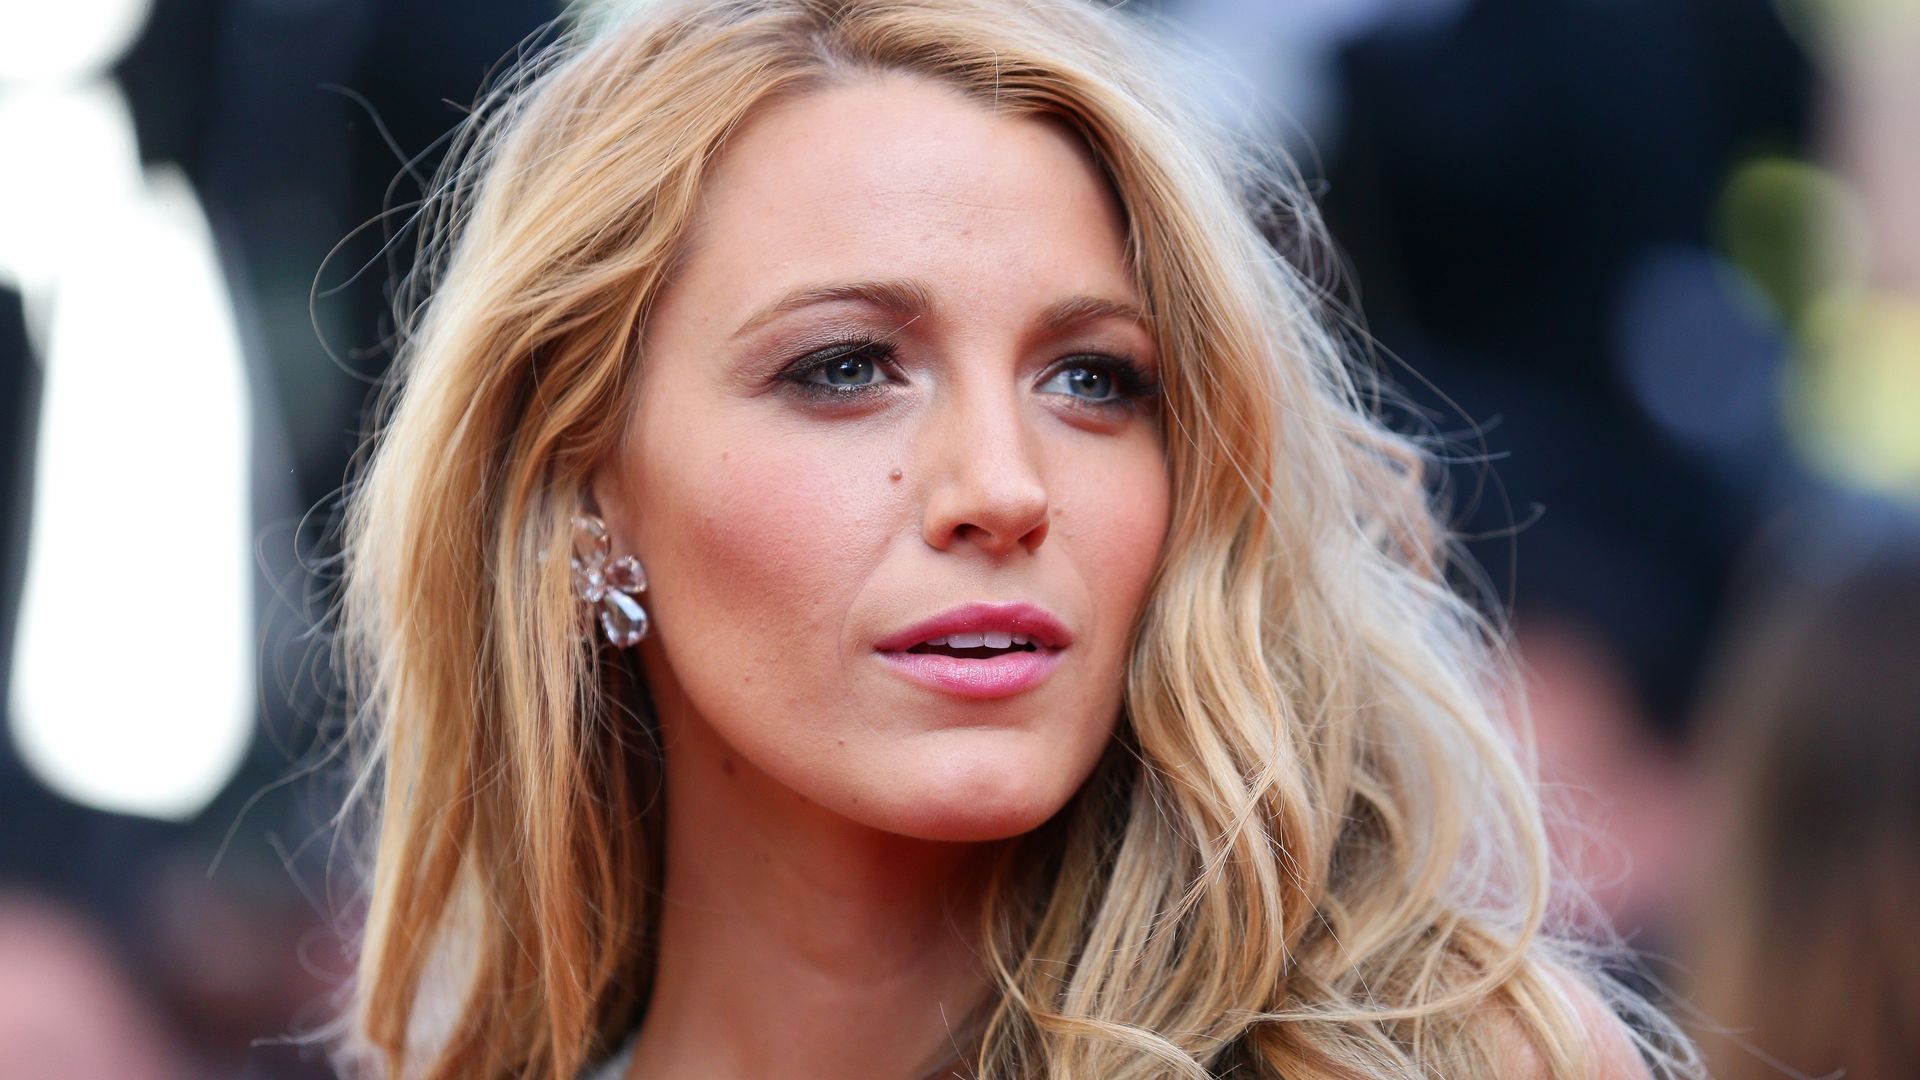 Blake Lively is the ultimate mermaid in outfit sure to cause a frenzy